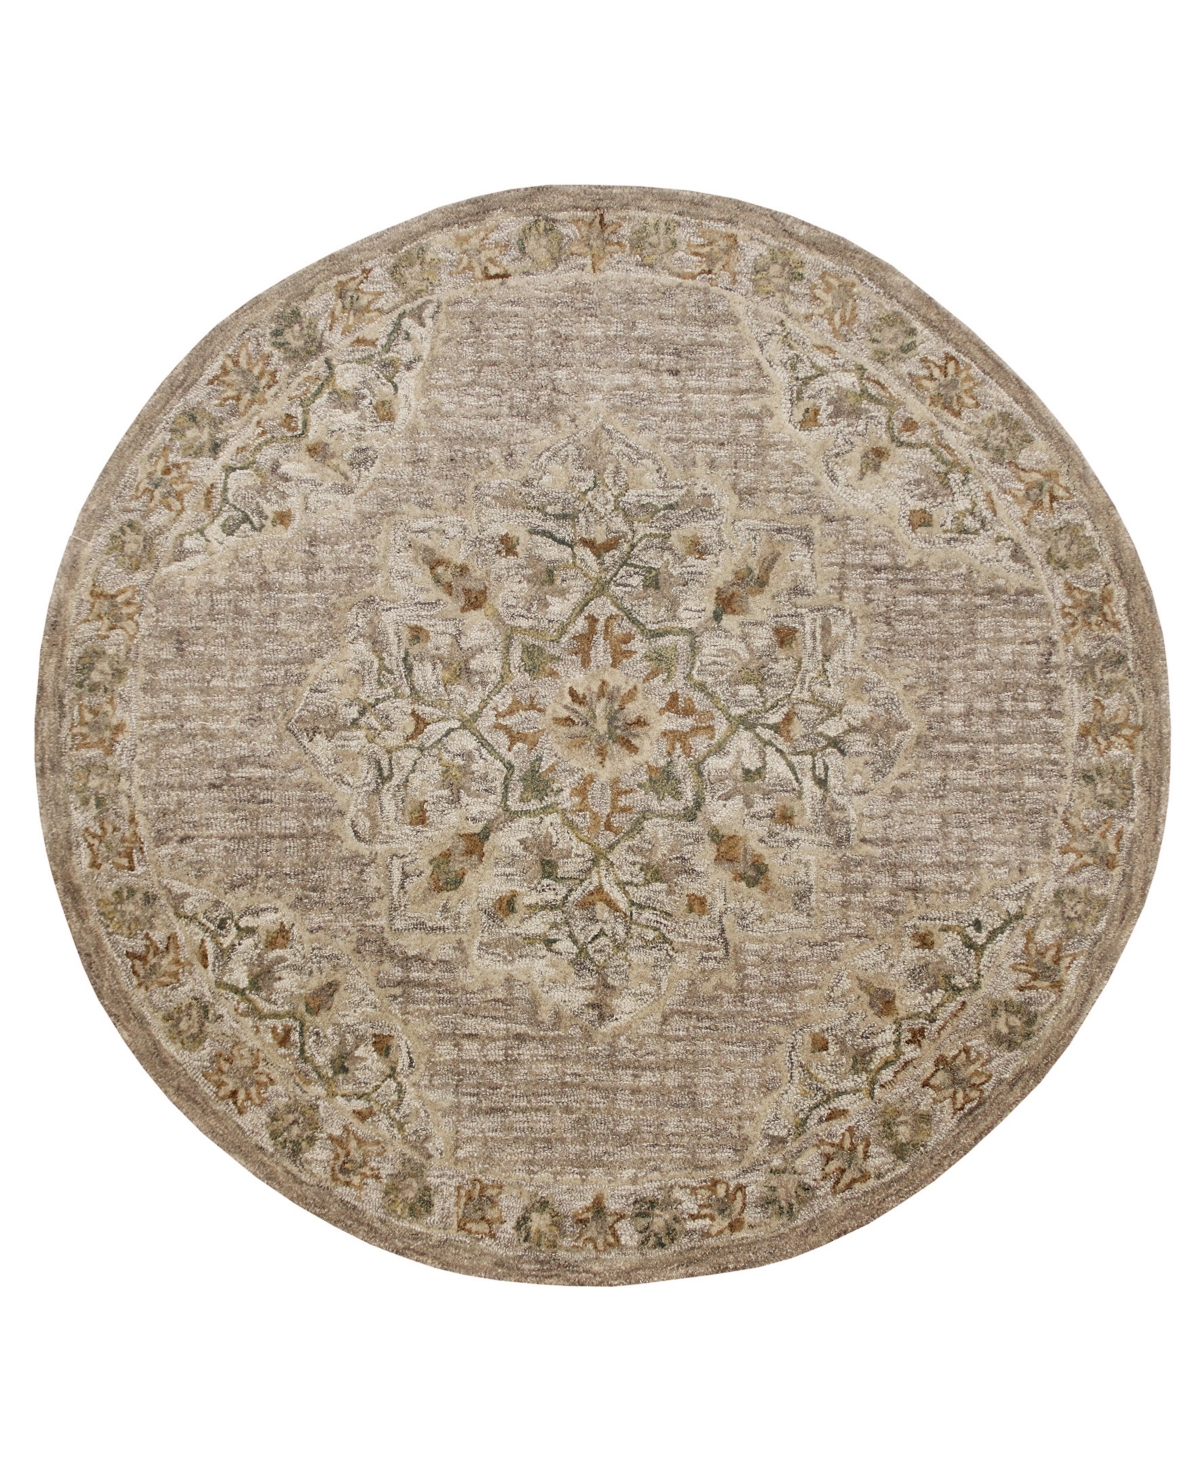 Lr Home Sweet Sinuo54120 6' X 6' Round Area Rug In Beige